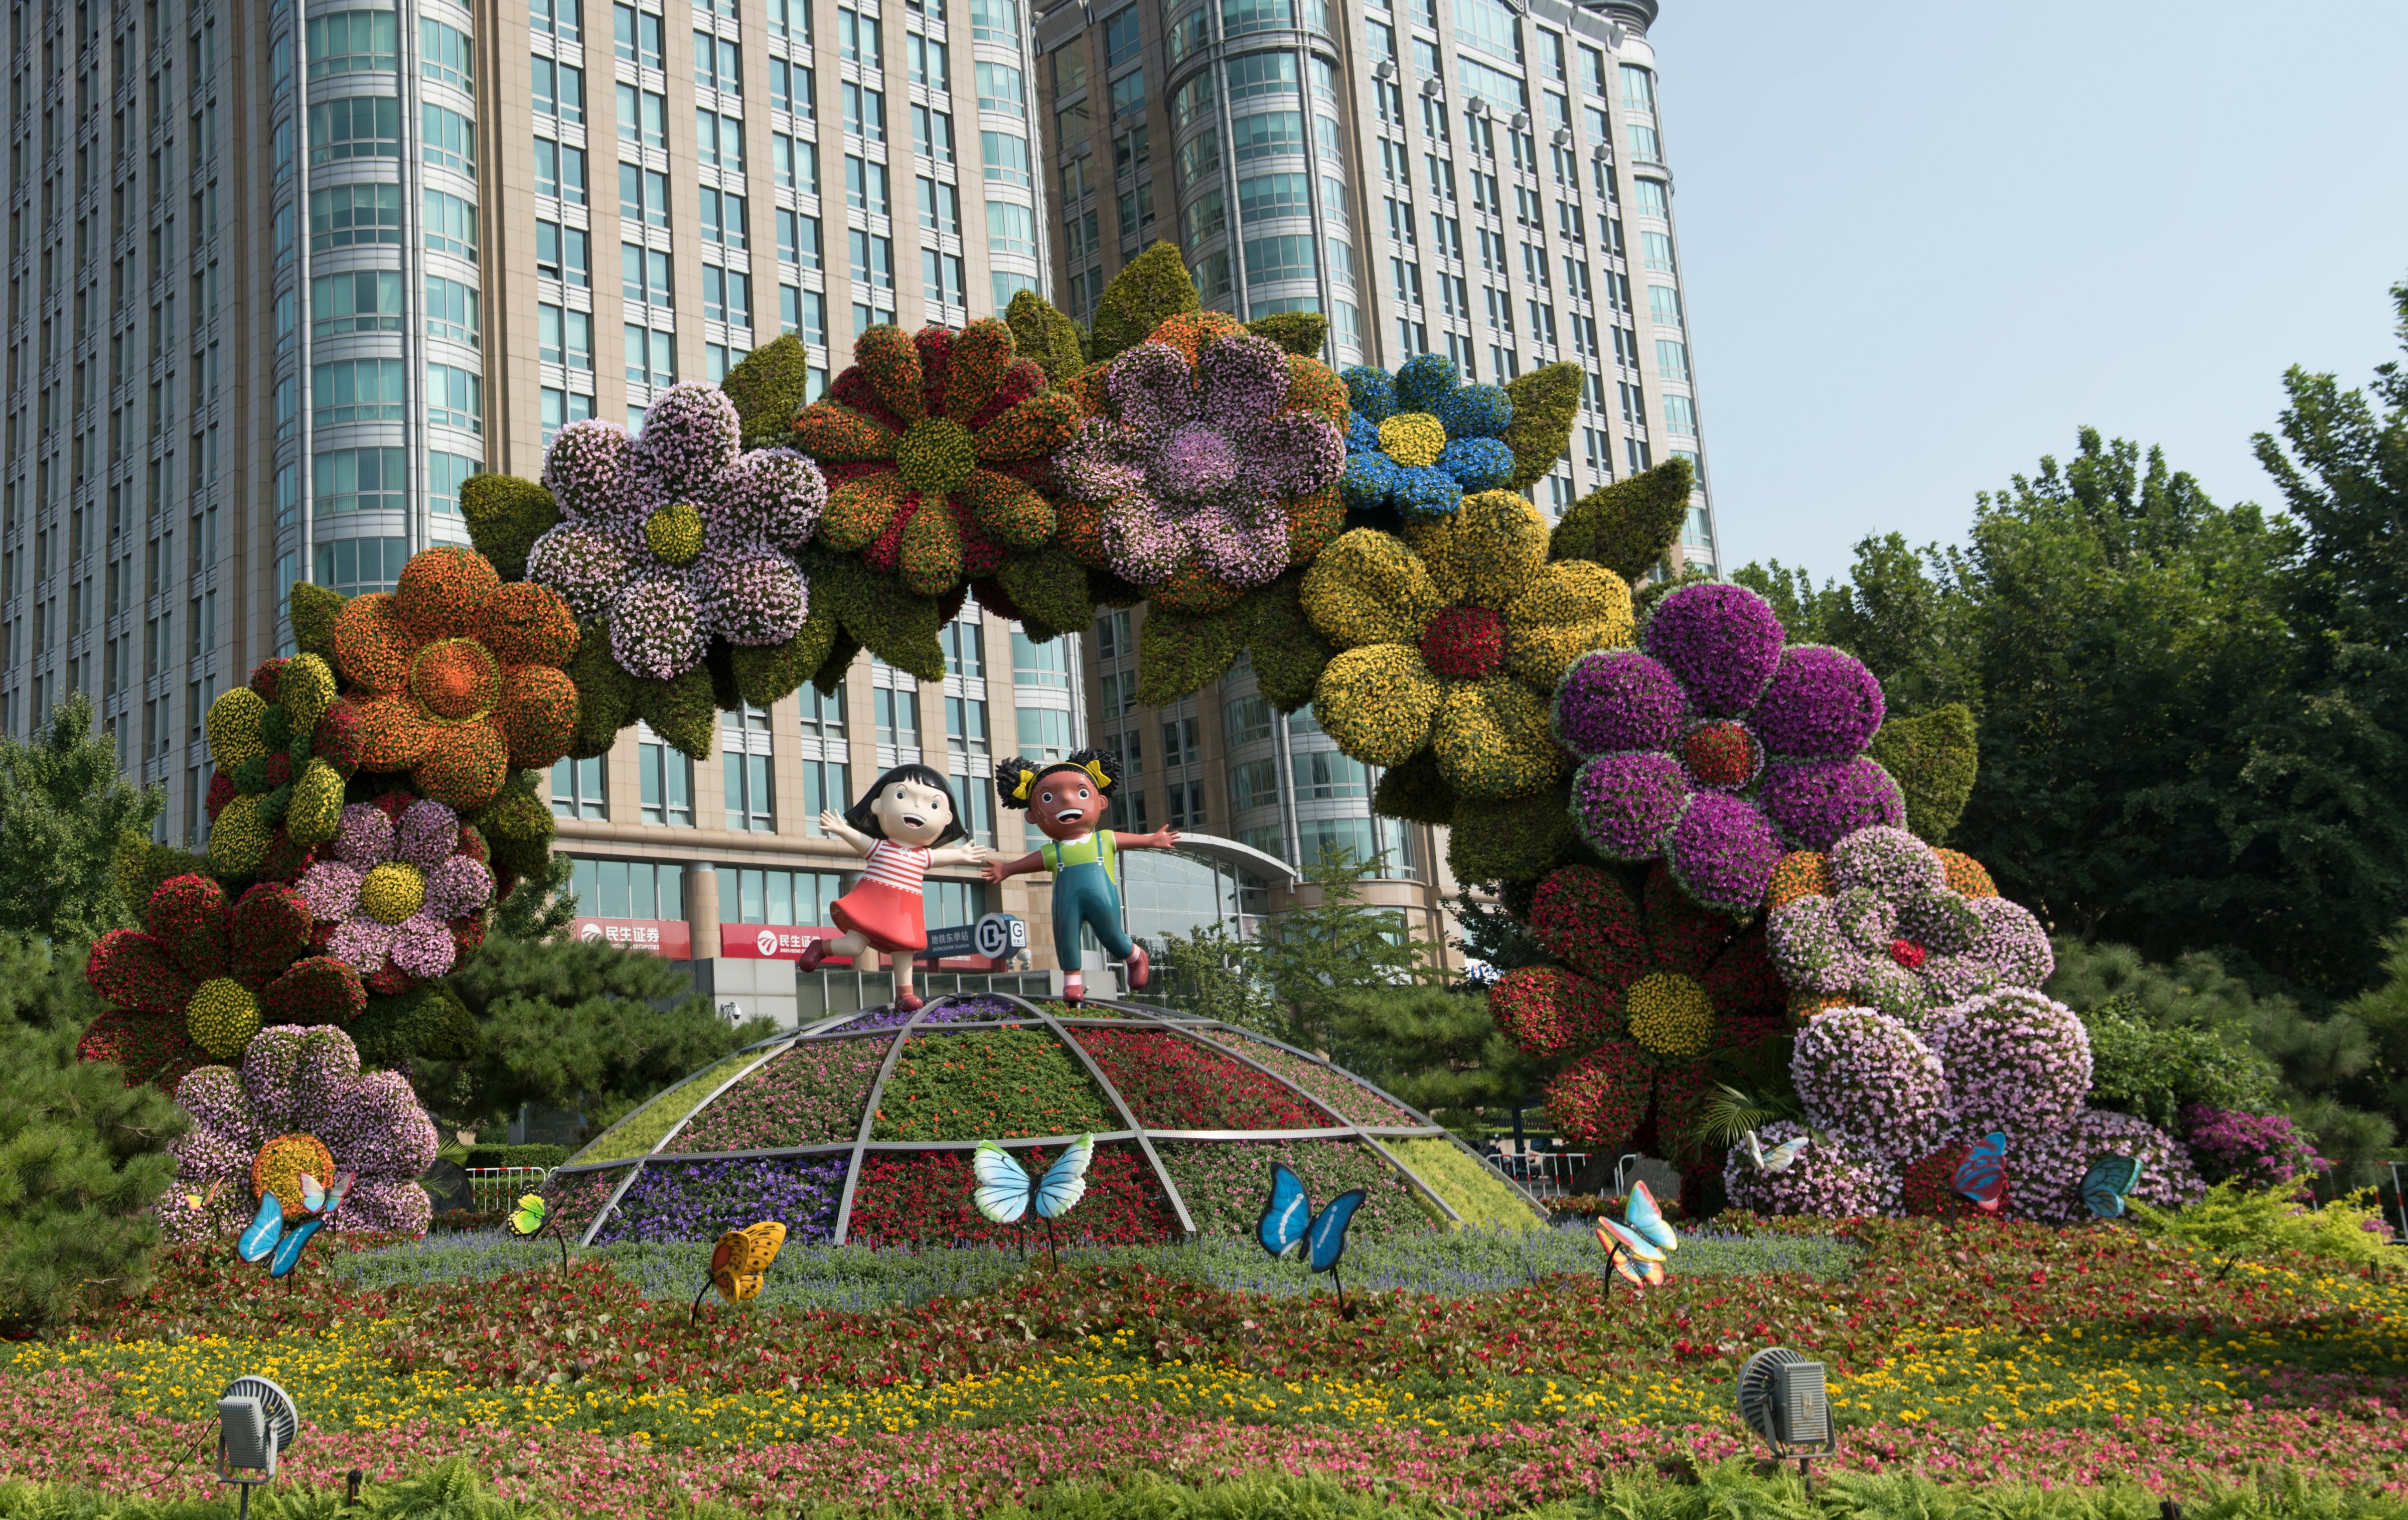 A flower parterre is set to welcome the upcoming 2018 Beijing Summit of the Forum on China-Africa Cooperation (FOCAC) at Dongdan on August 26, 2018 in Beijing, China. The 2018 Beijing Summit of the Forum on China-Africa Cooperation (FOCAC) is scheduled to be held on September 3-4 in Beijing. (VCG/VCG via Getty Images)